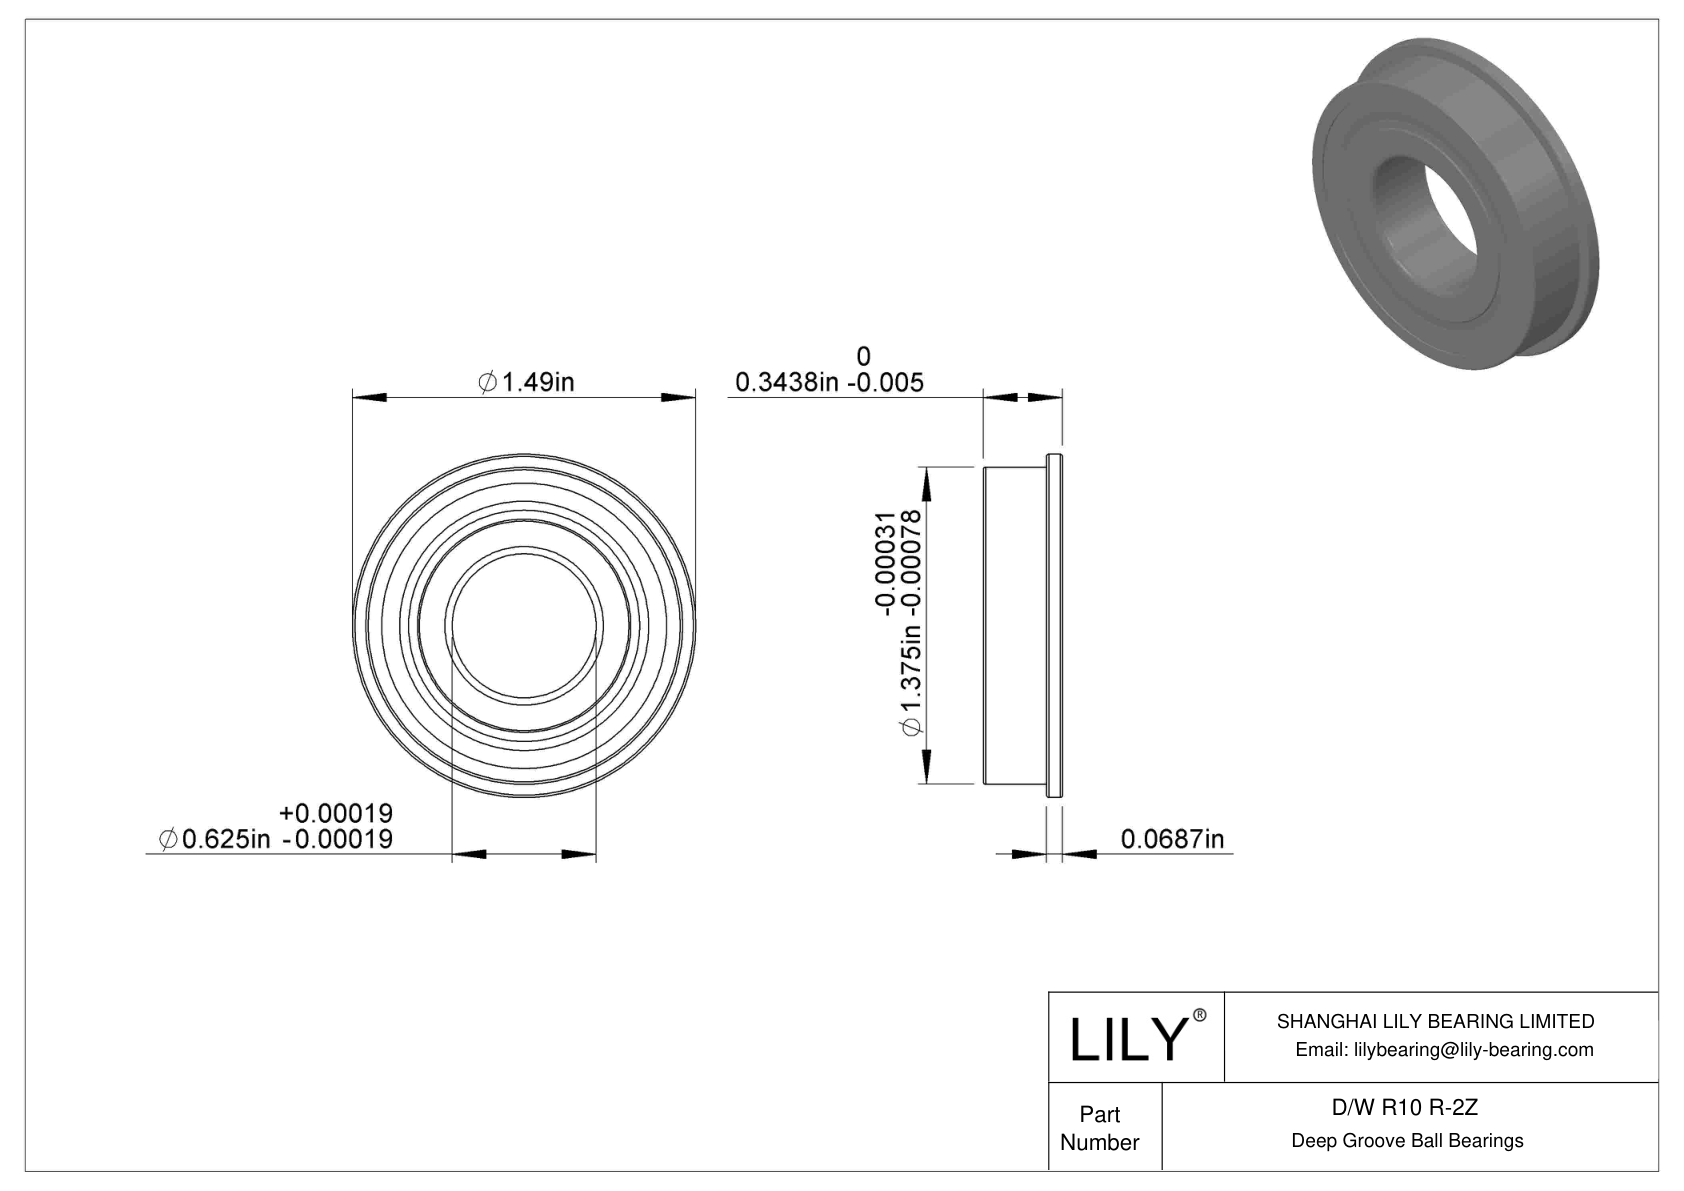 D/W R10 R-2Z Flanged Ball Bearings cad drawing